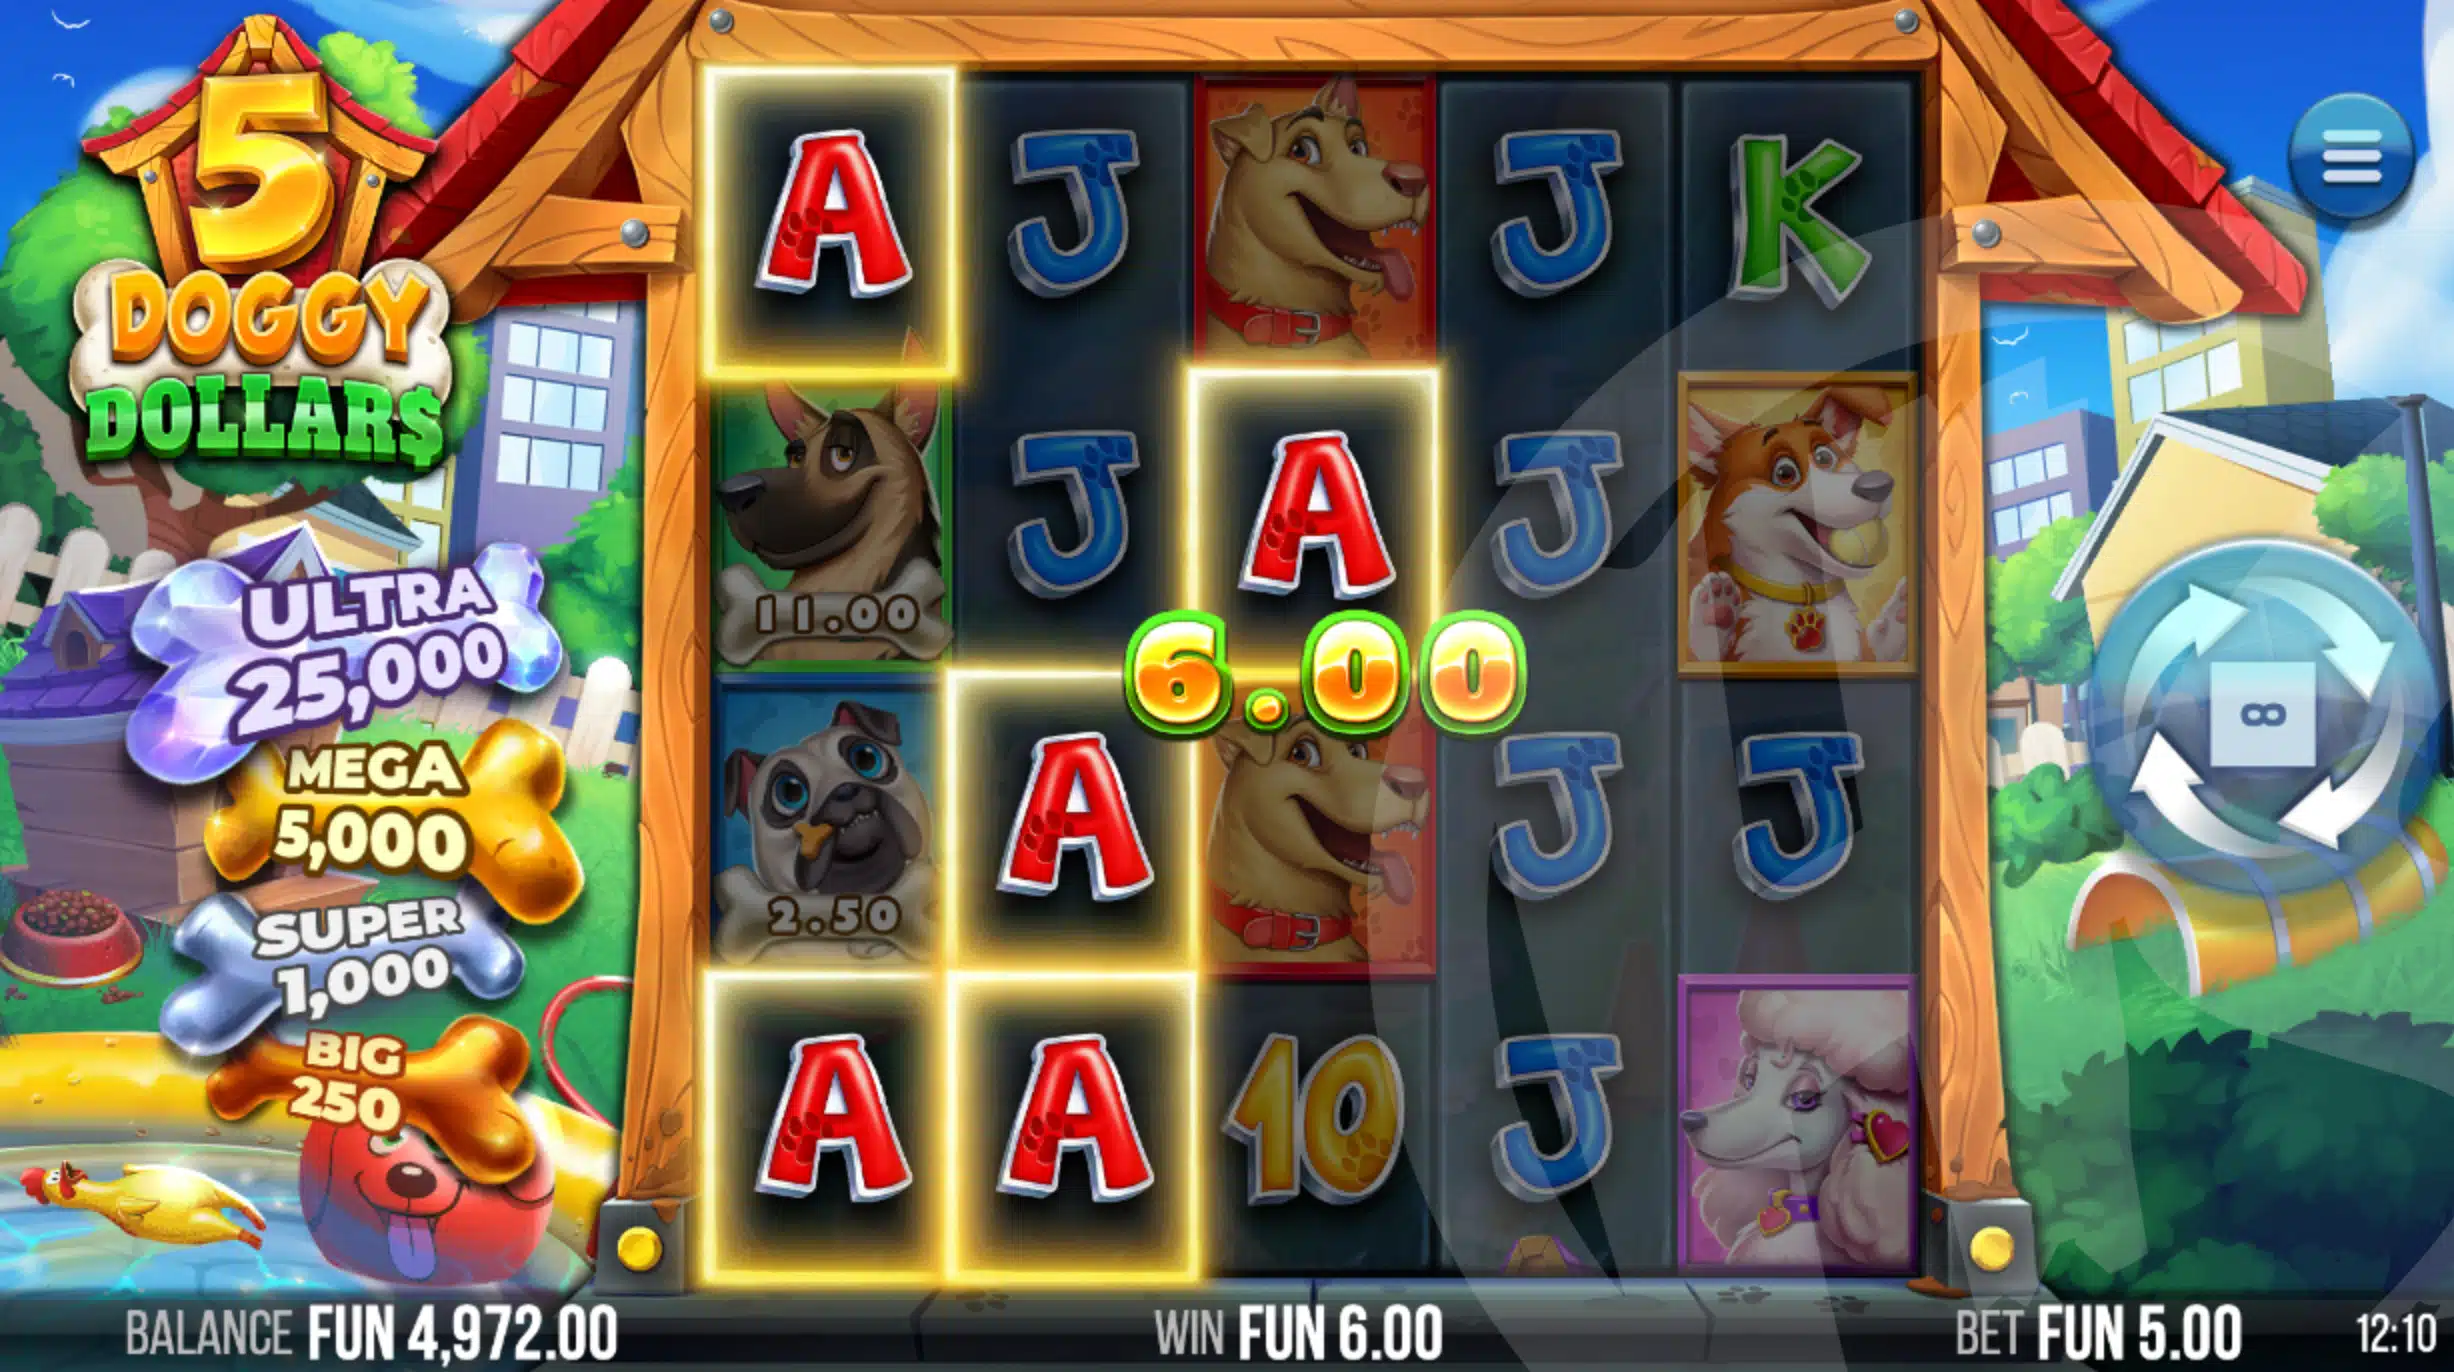 5 Doggy Dollars Offers Players 1,024 Ways to Win